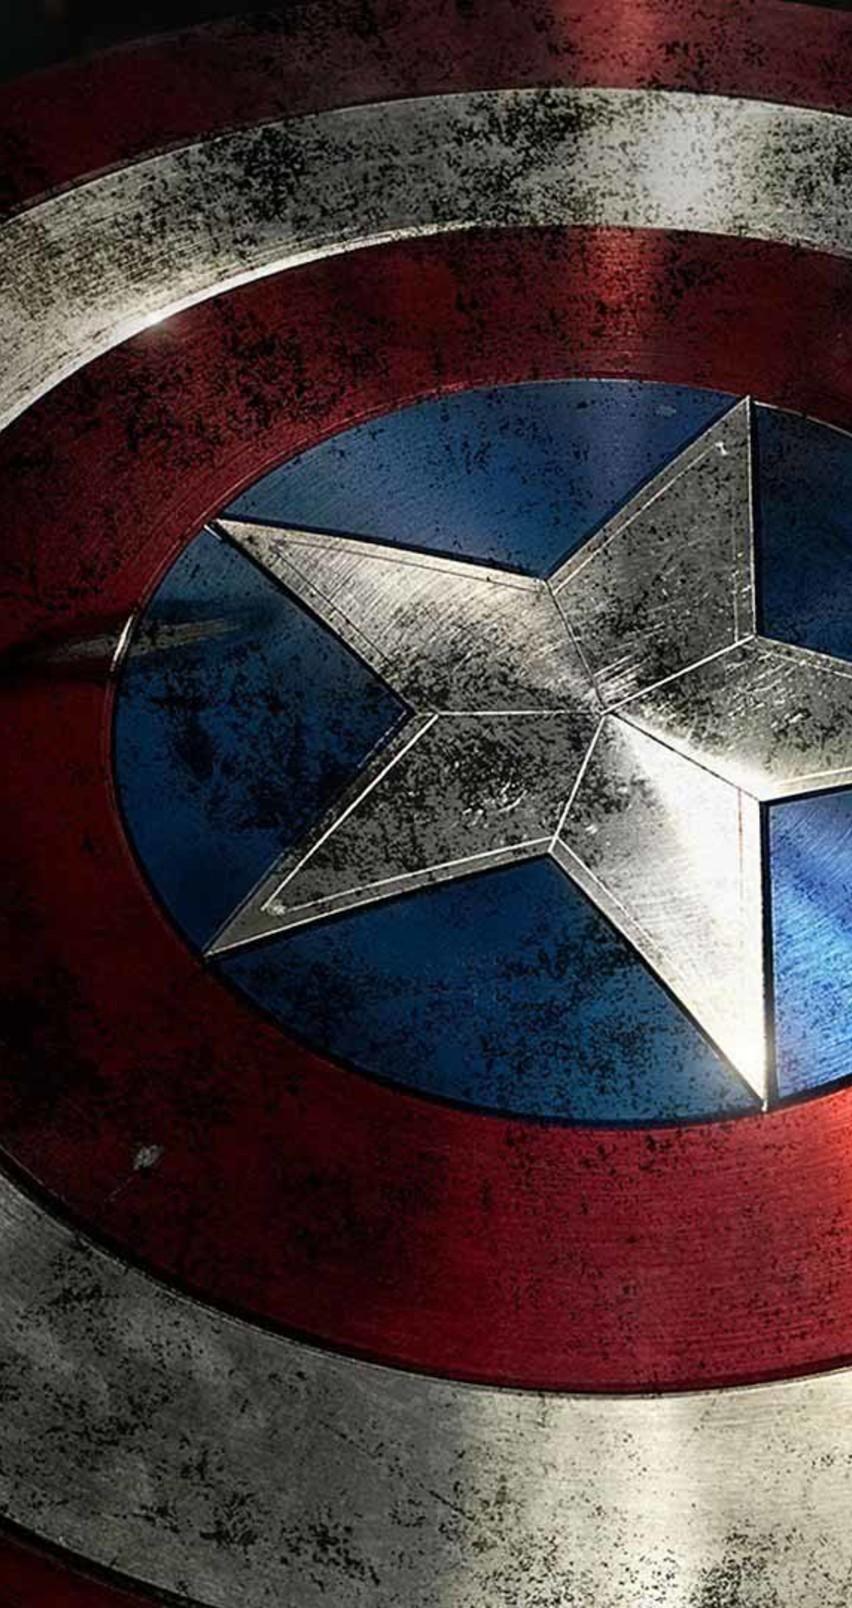 Free download Captain America and his star HD wallpaper